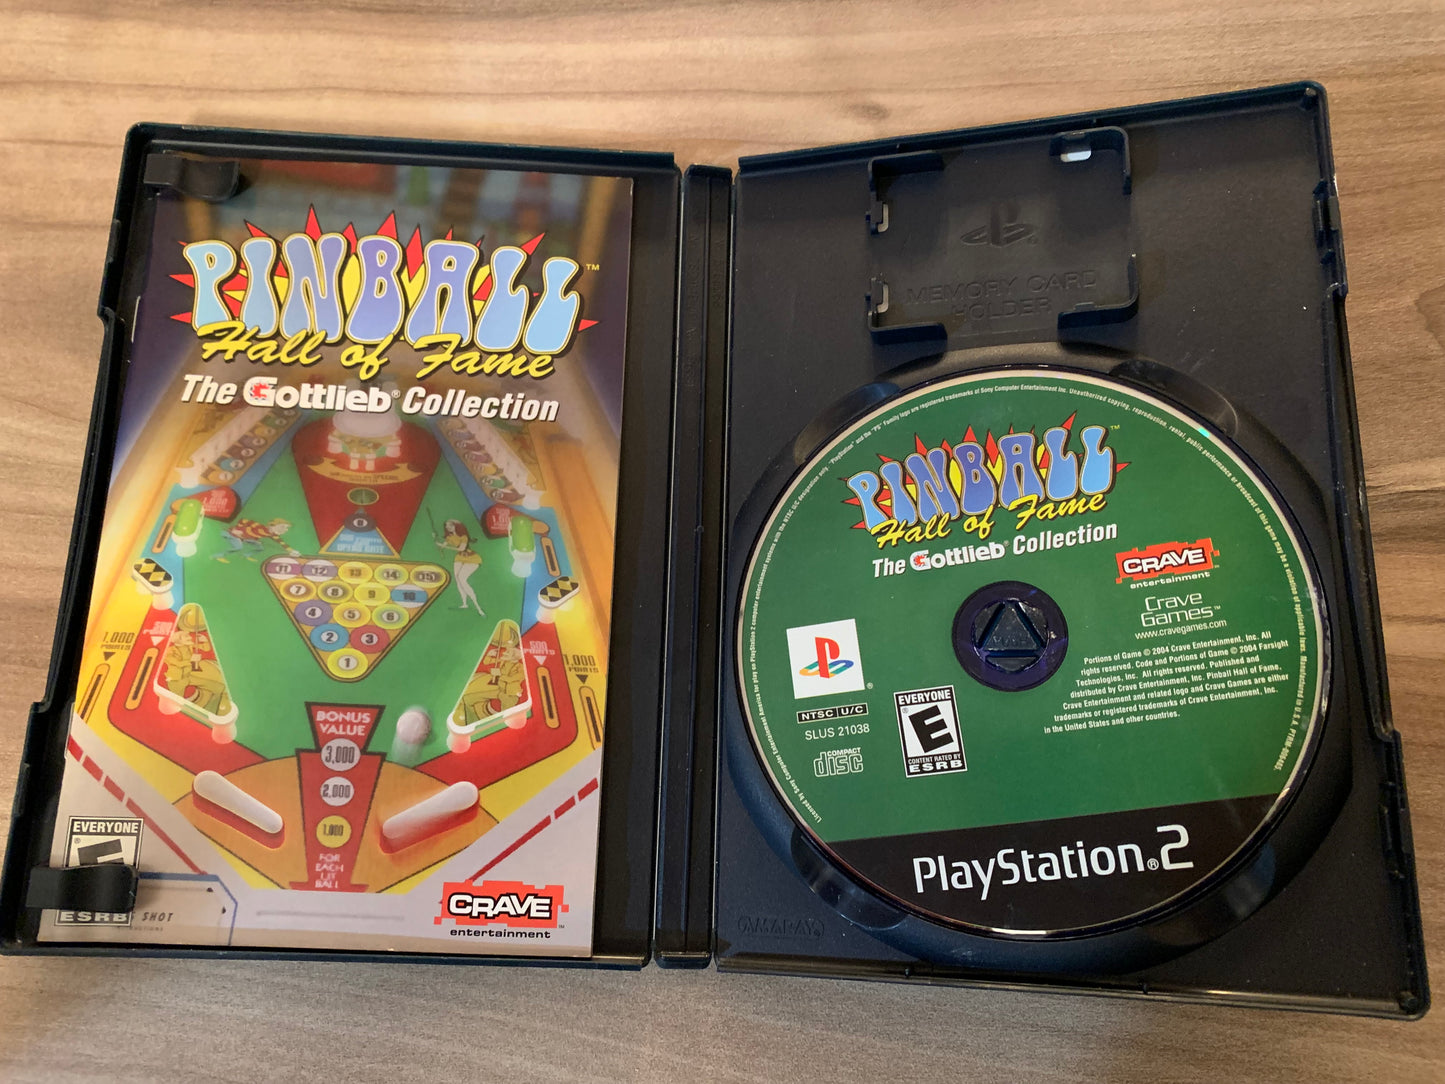 SONY PLAYSTATiON 2 [PS2] | PiNBALL HALL OF FAME THE GOTTLiEB COLLECTiON